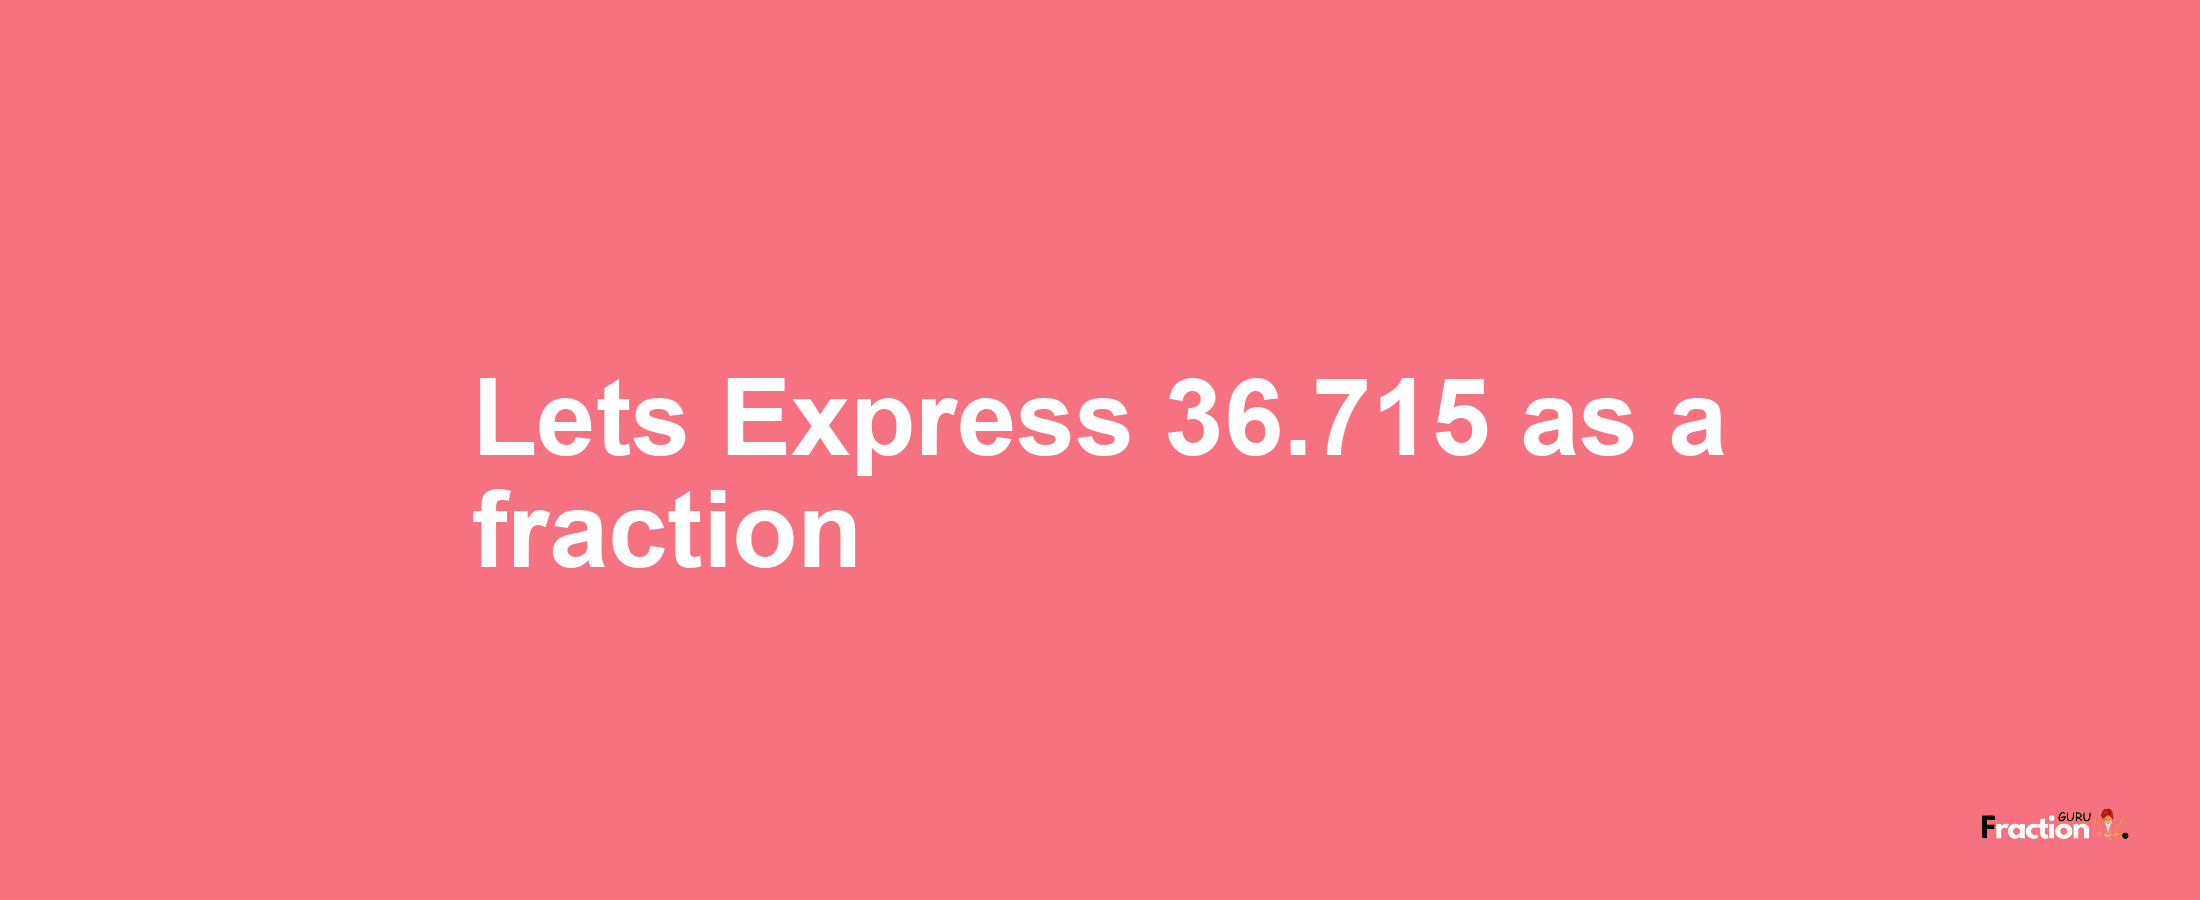 Lets Express 36.715 as afraction